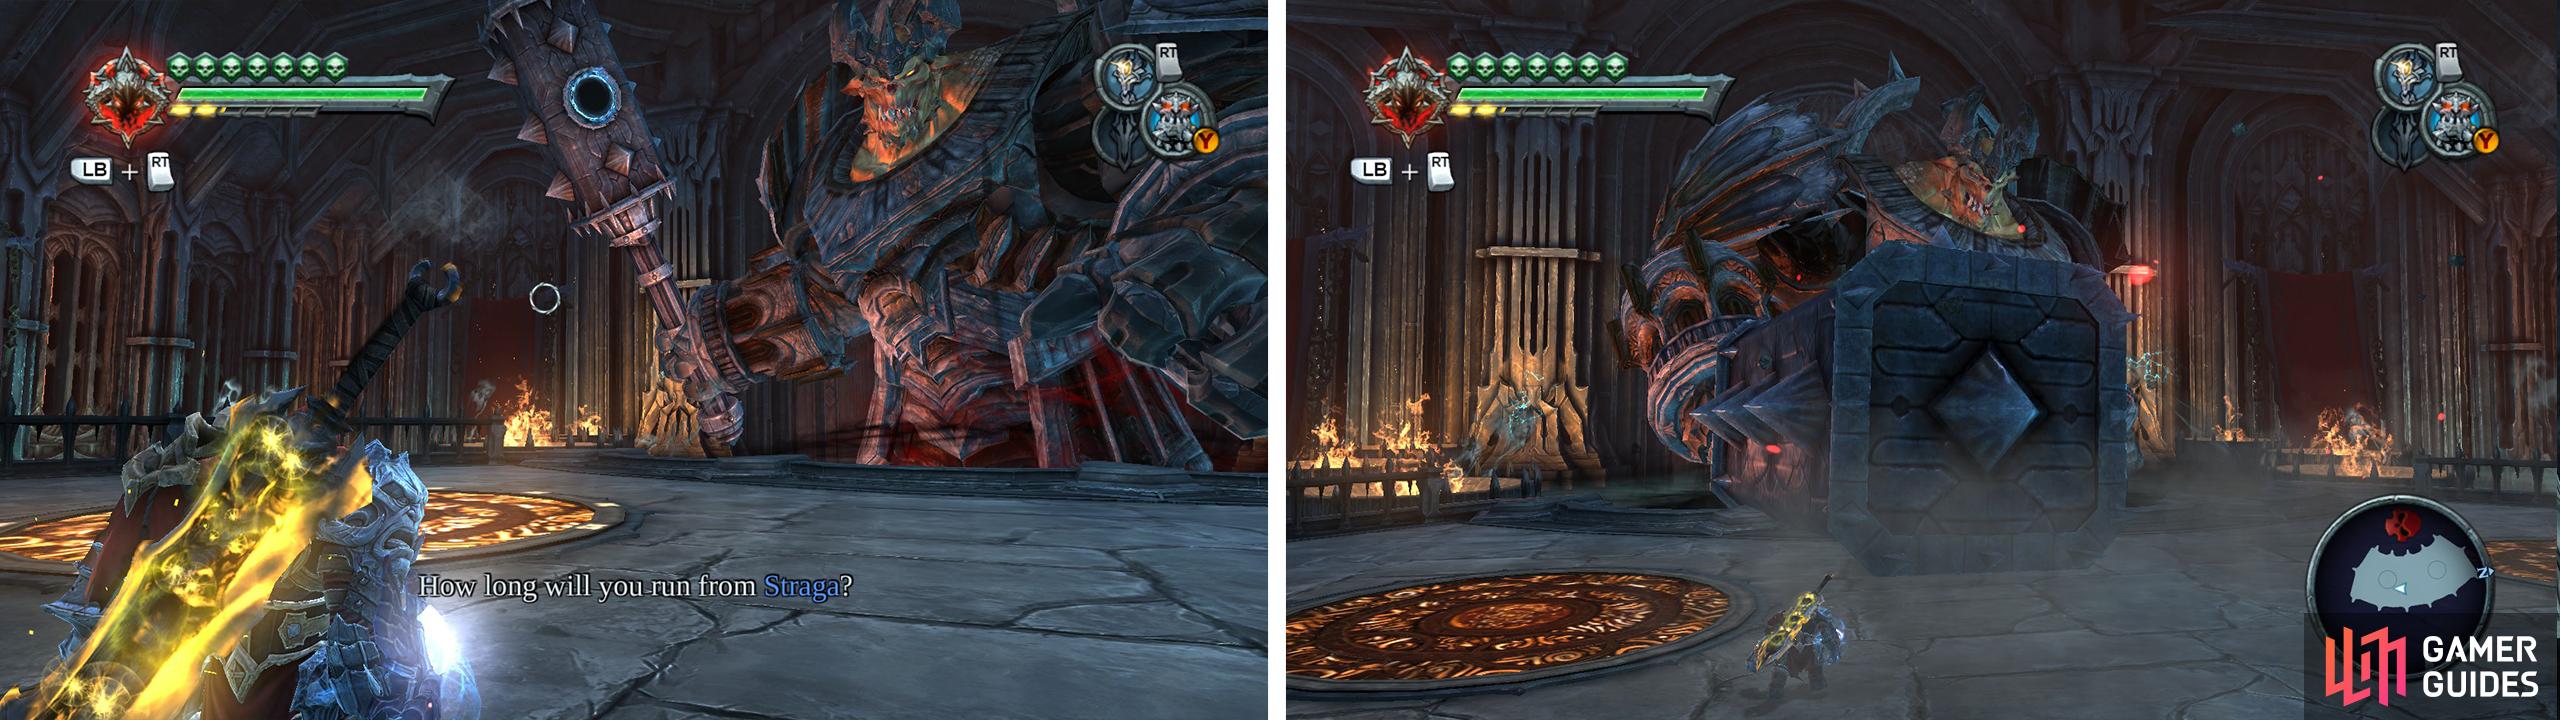 Place a portal on Stragas hammer (left) and use the portal pad on the floor to teleport up to his weak spot. Avoid all of his other attacks by dashing or double jumping (right).